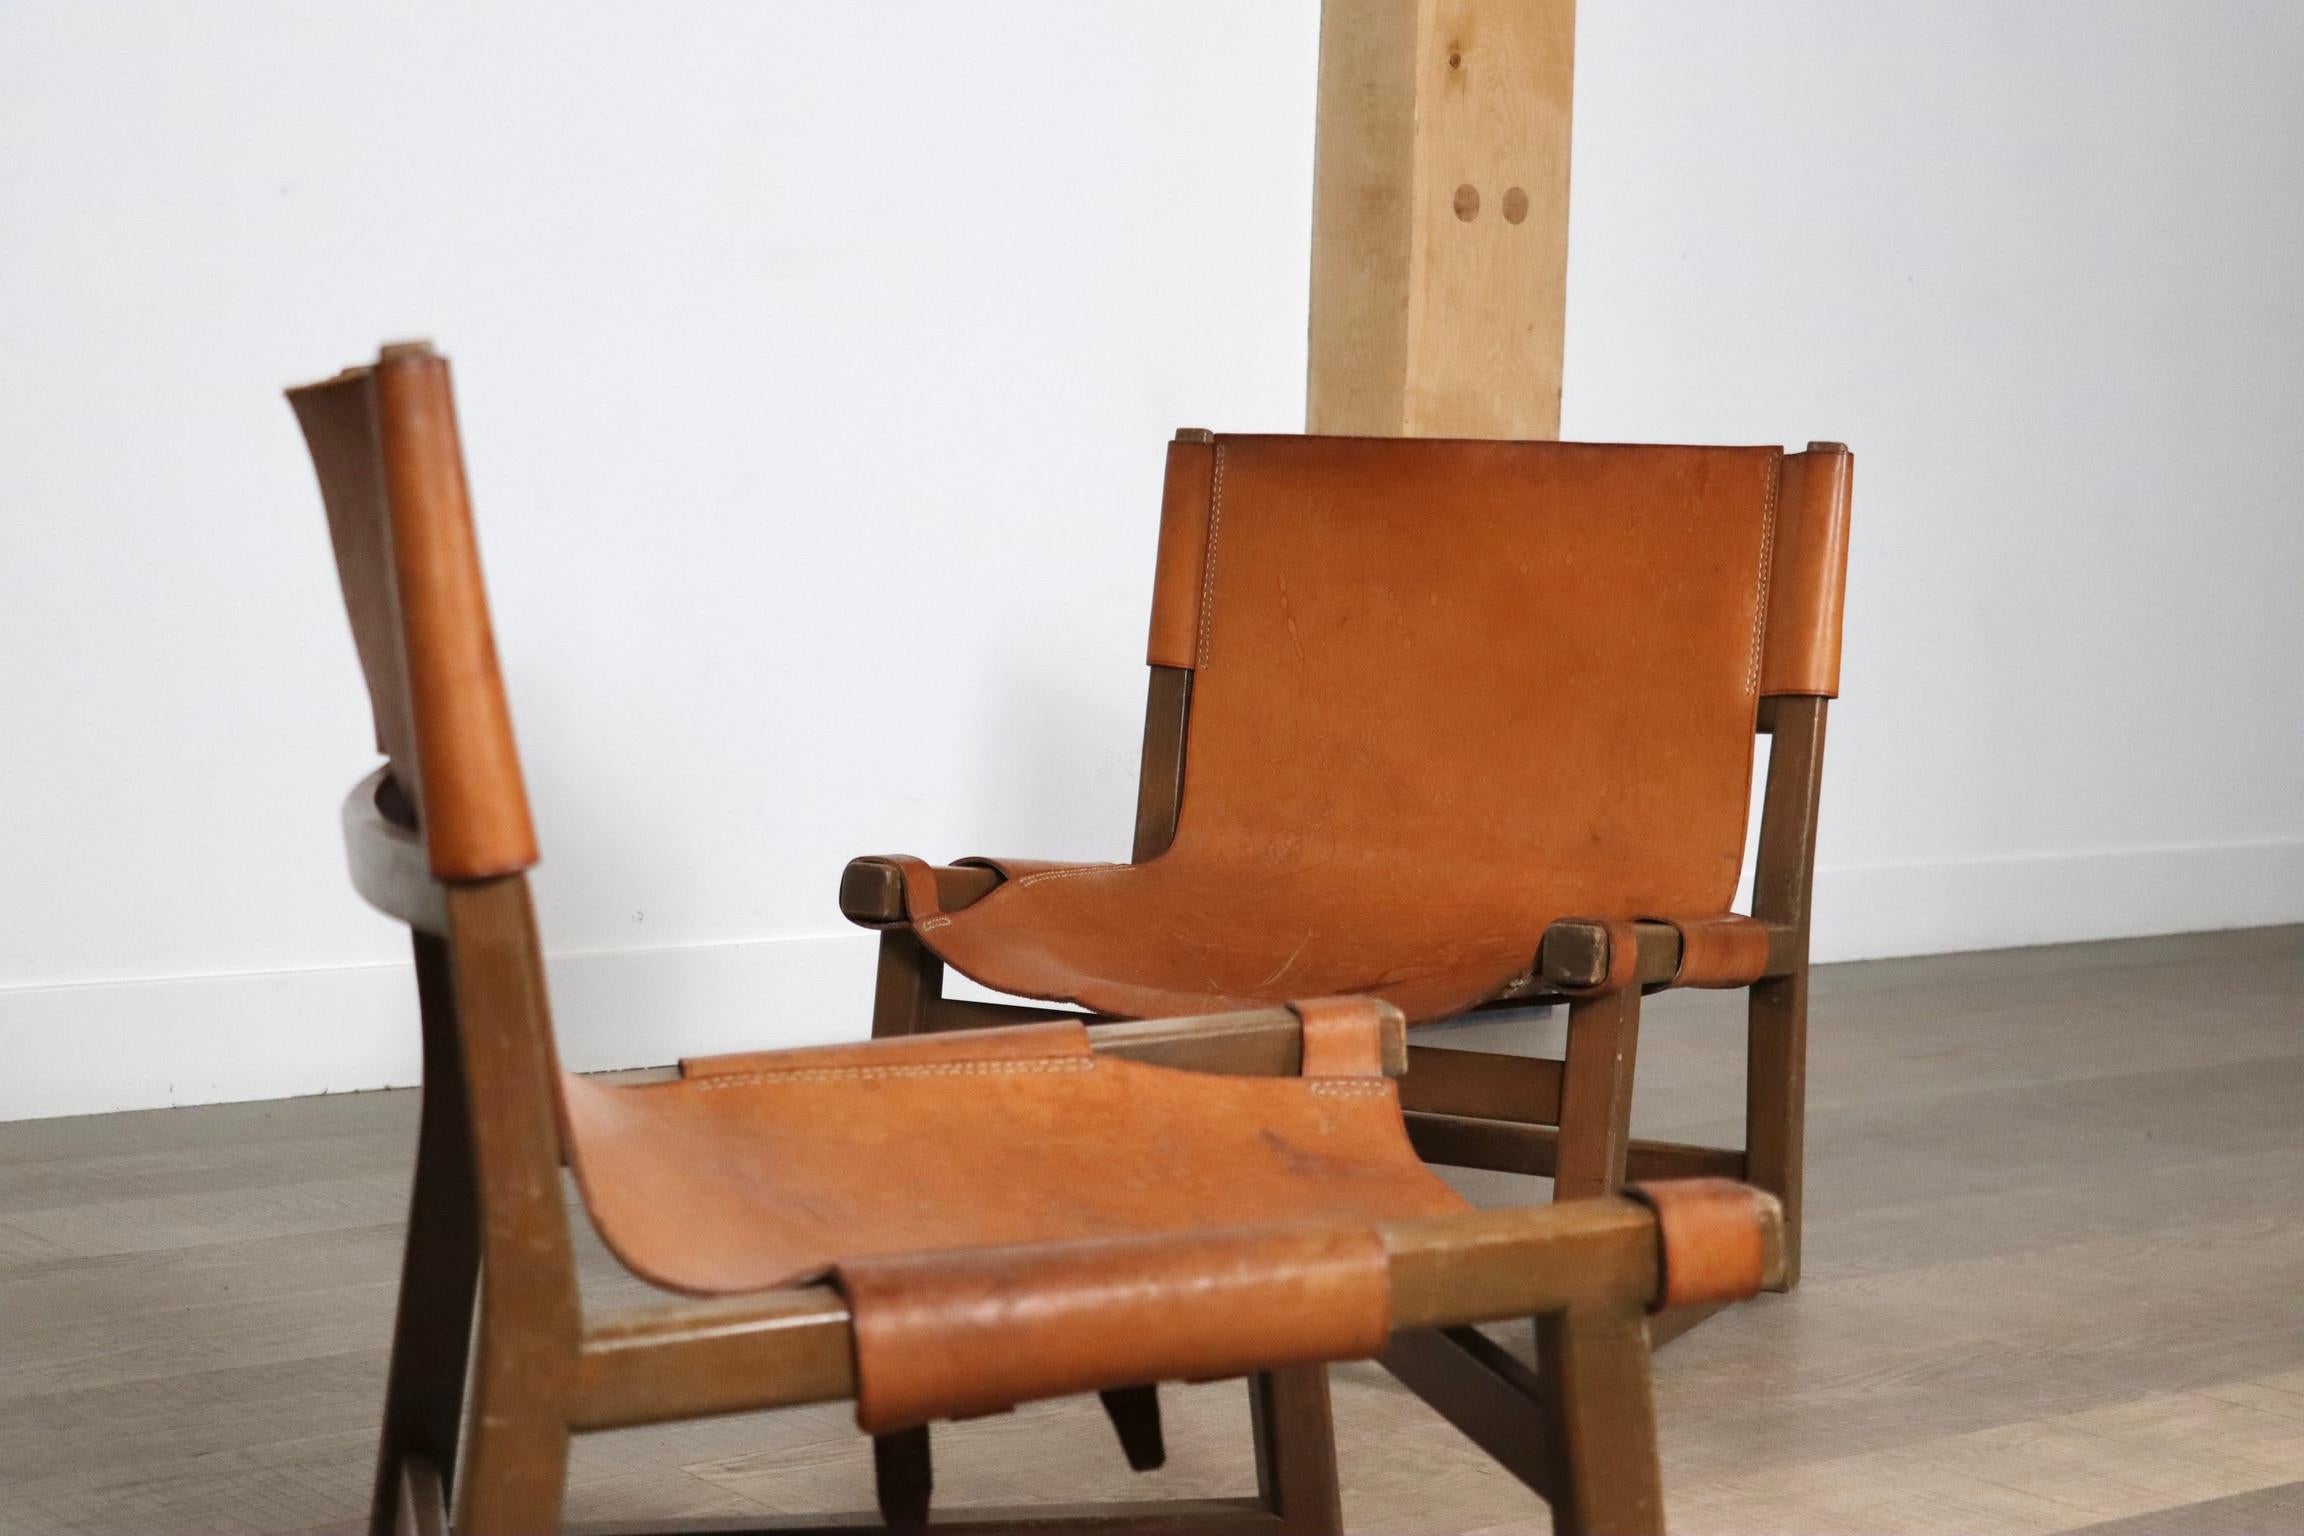 Pair Of Riaza Chairs In Cognac Leather By Paco Muñoz For Darro Gallery, Spain, 1 For Sale 1